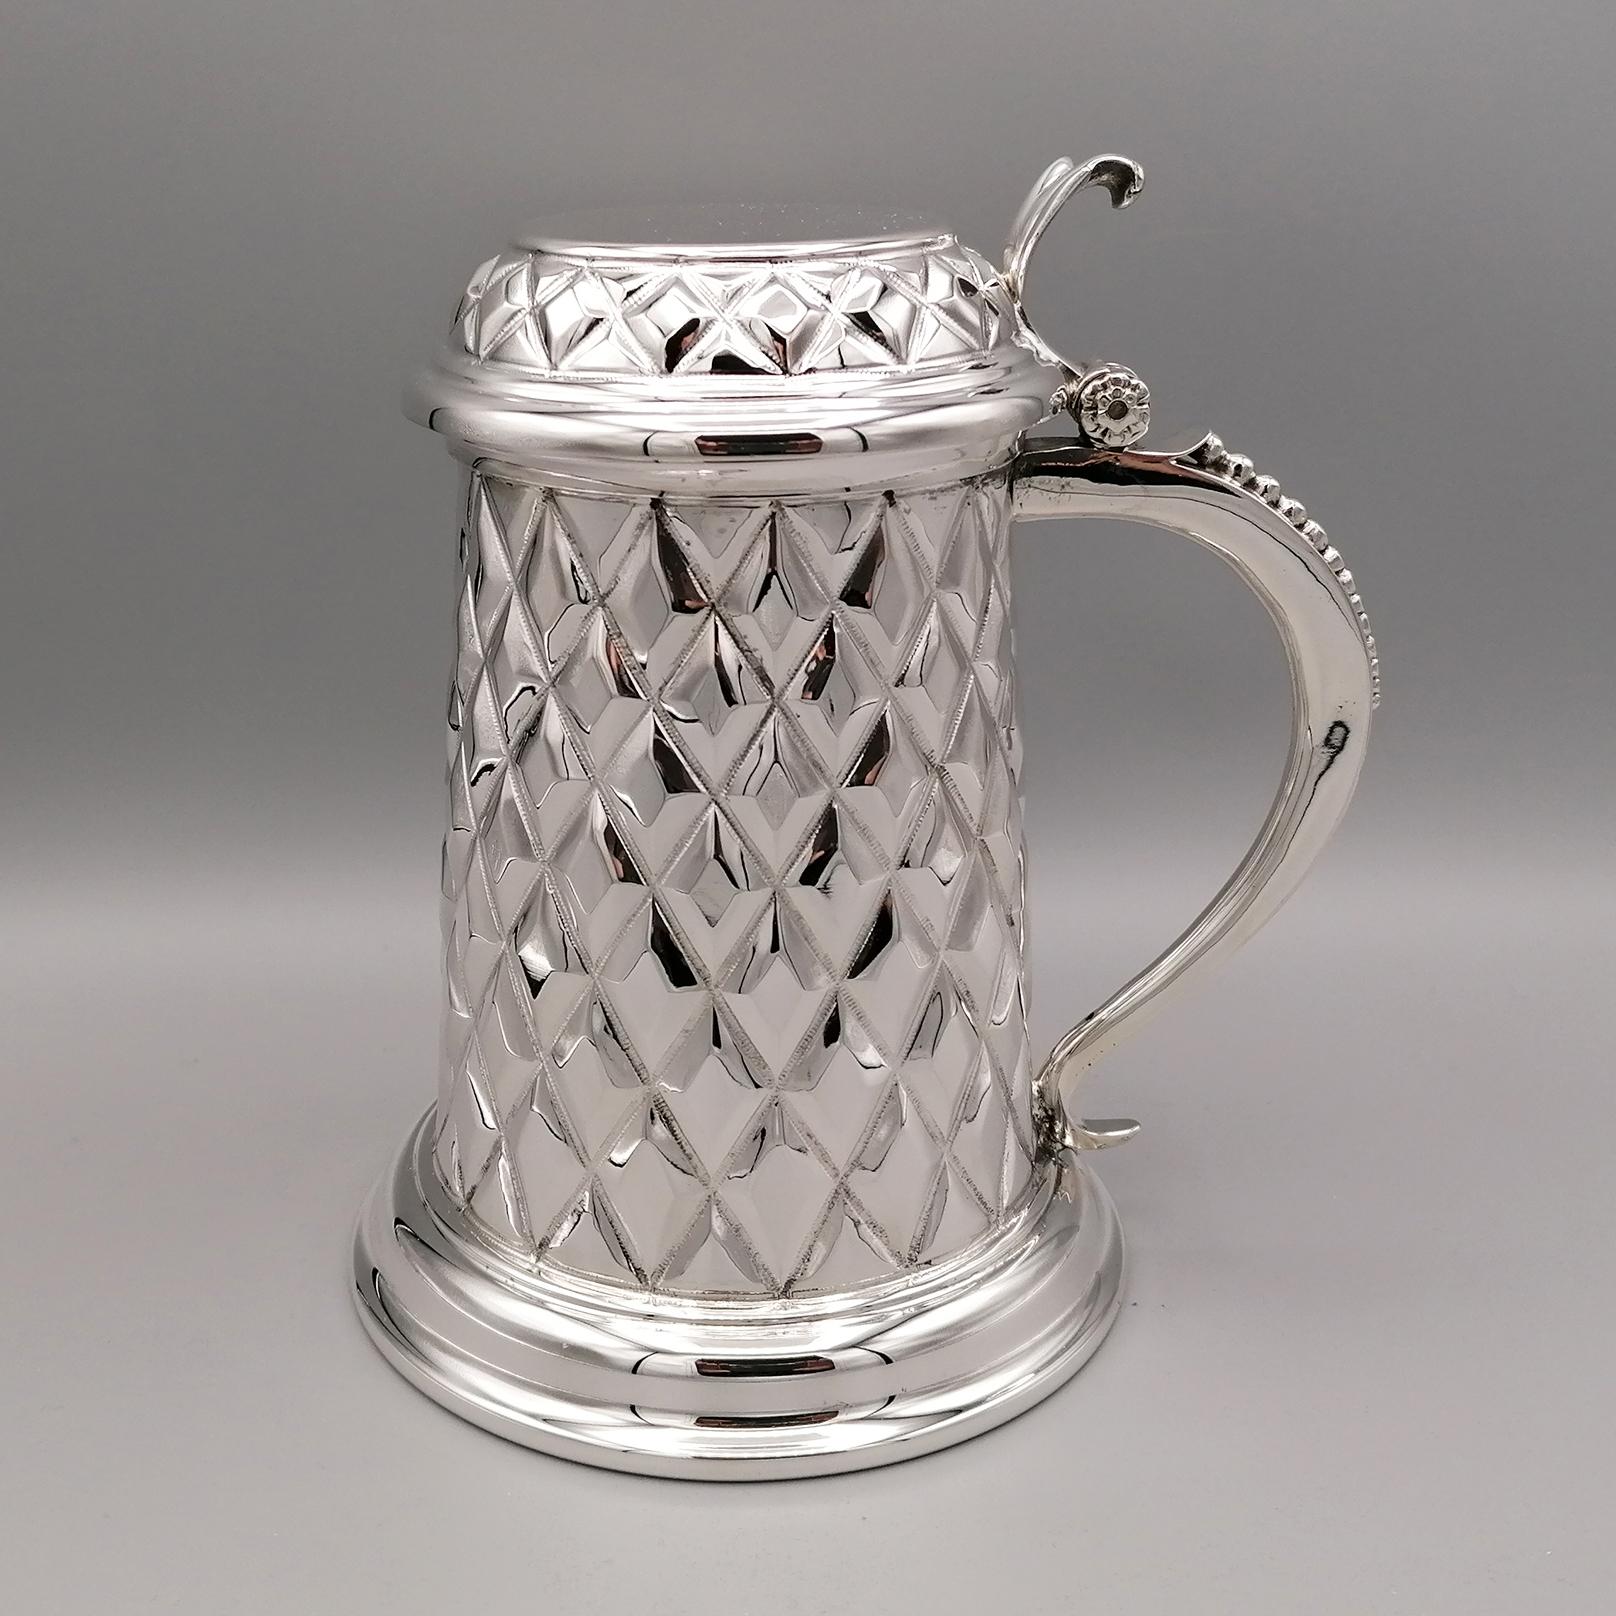 Tarkard in solid silver 800.
The design on the body has a diamond pattern.
The beaded handle is worked with casting motifs
The interior of the tarkard is gilded
760 grams.